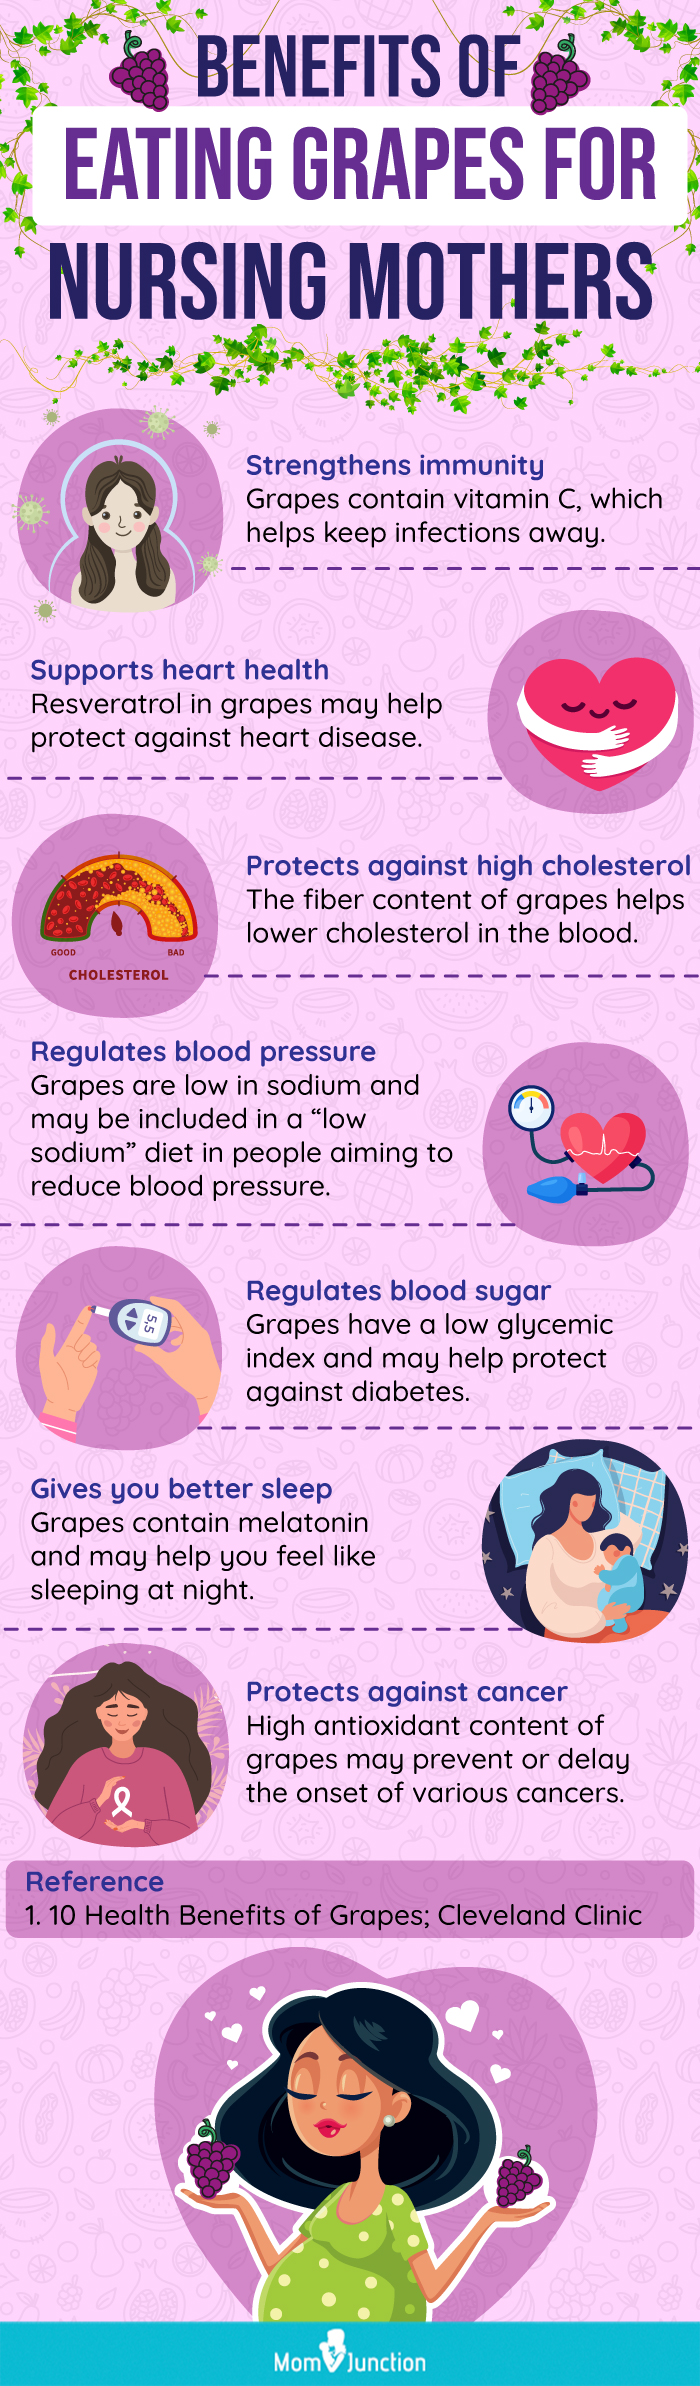 benefits of eating grapes for nursing mothers (infographic)